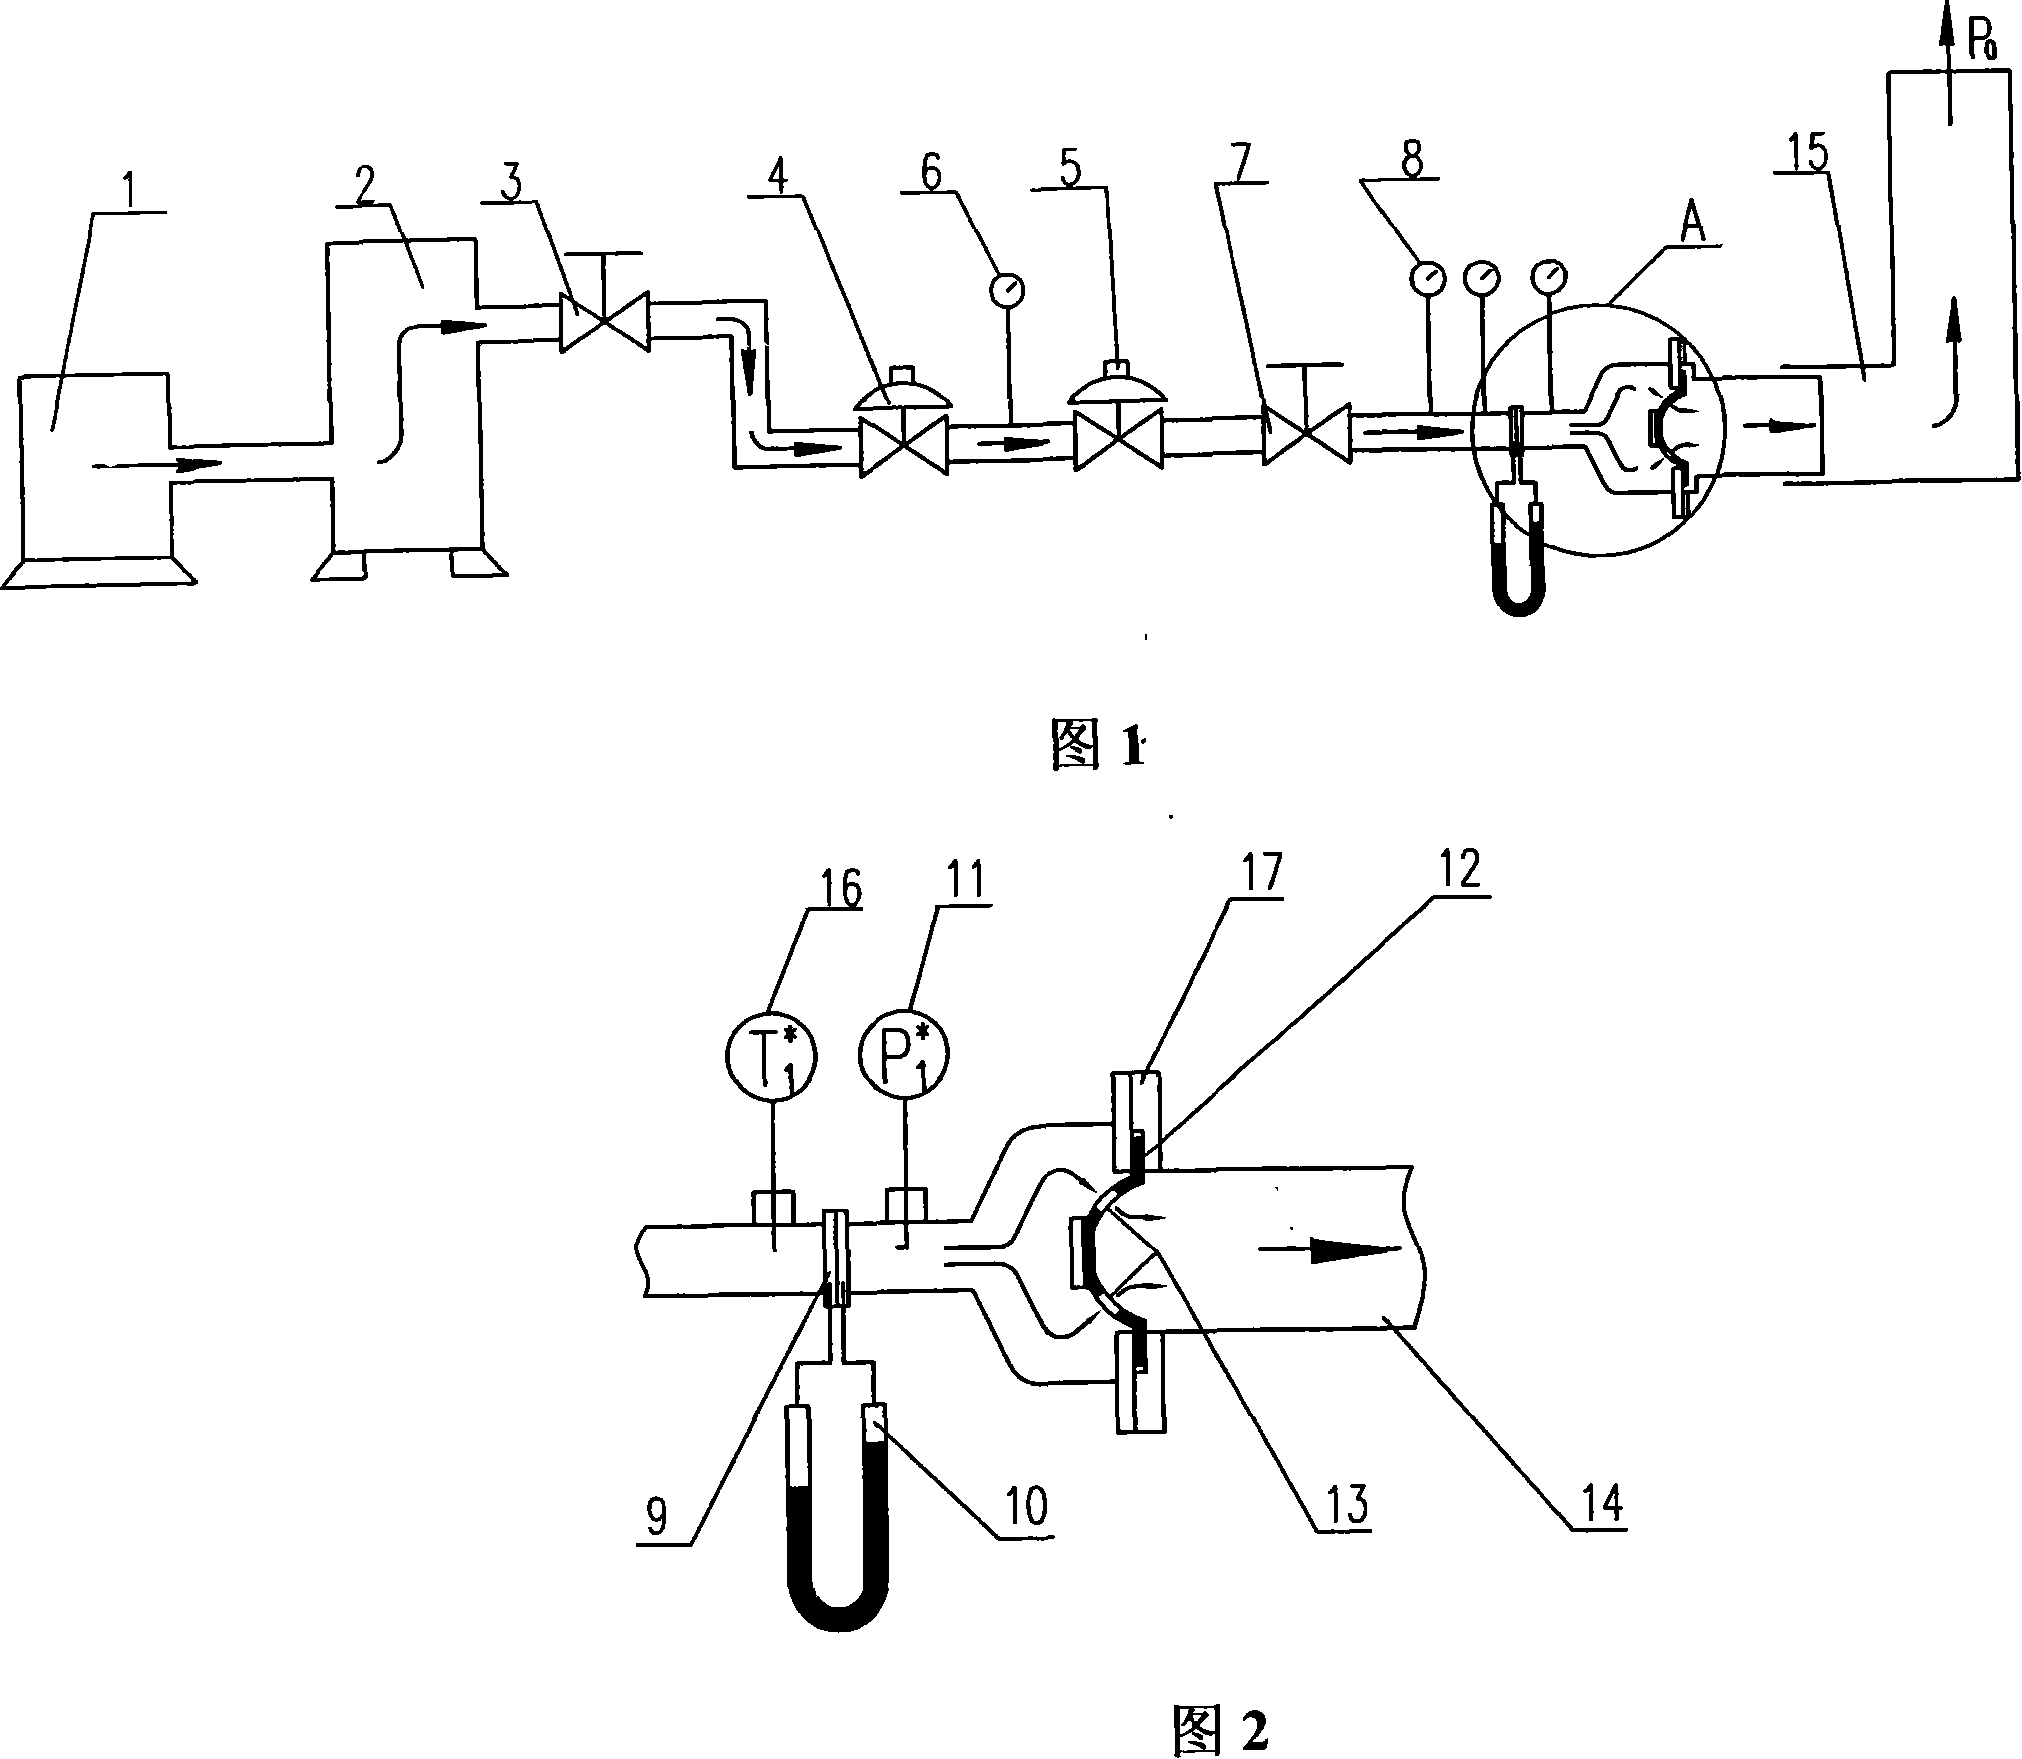 Method for measuring complicated type face flow area with supercritical pressure ratio